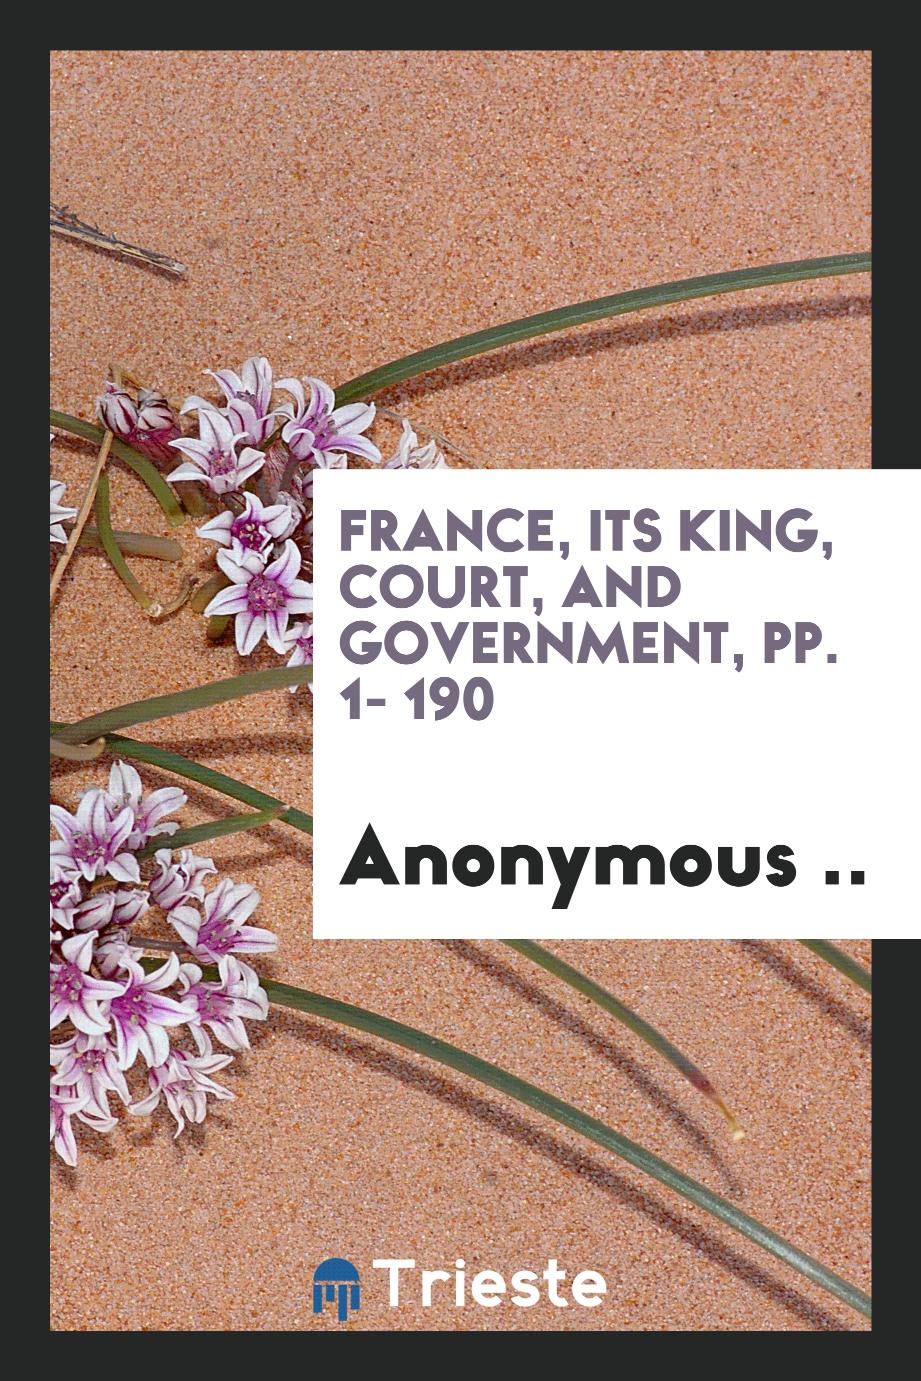 France, Its King, Court, and Government, pp. 1- 190